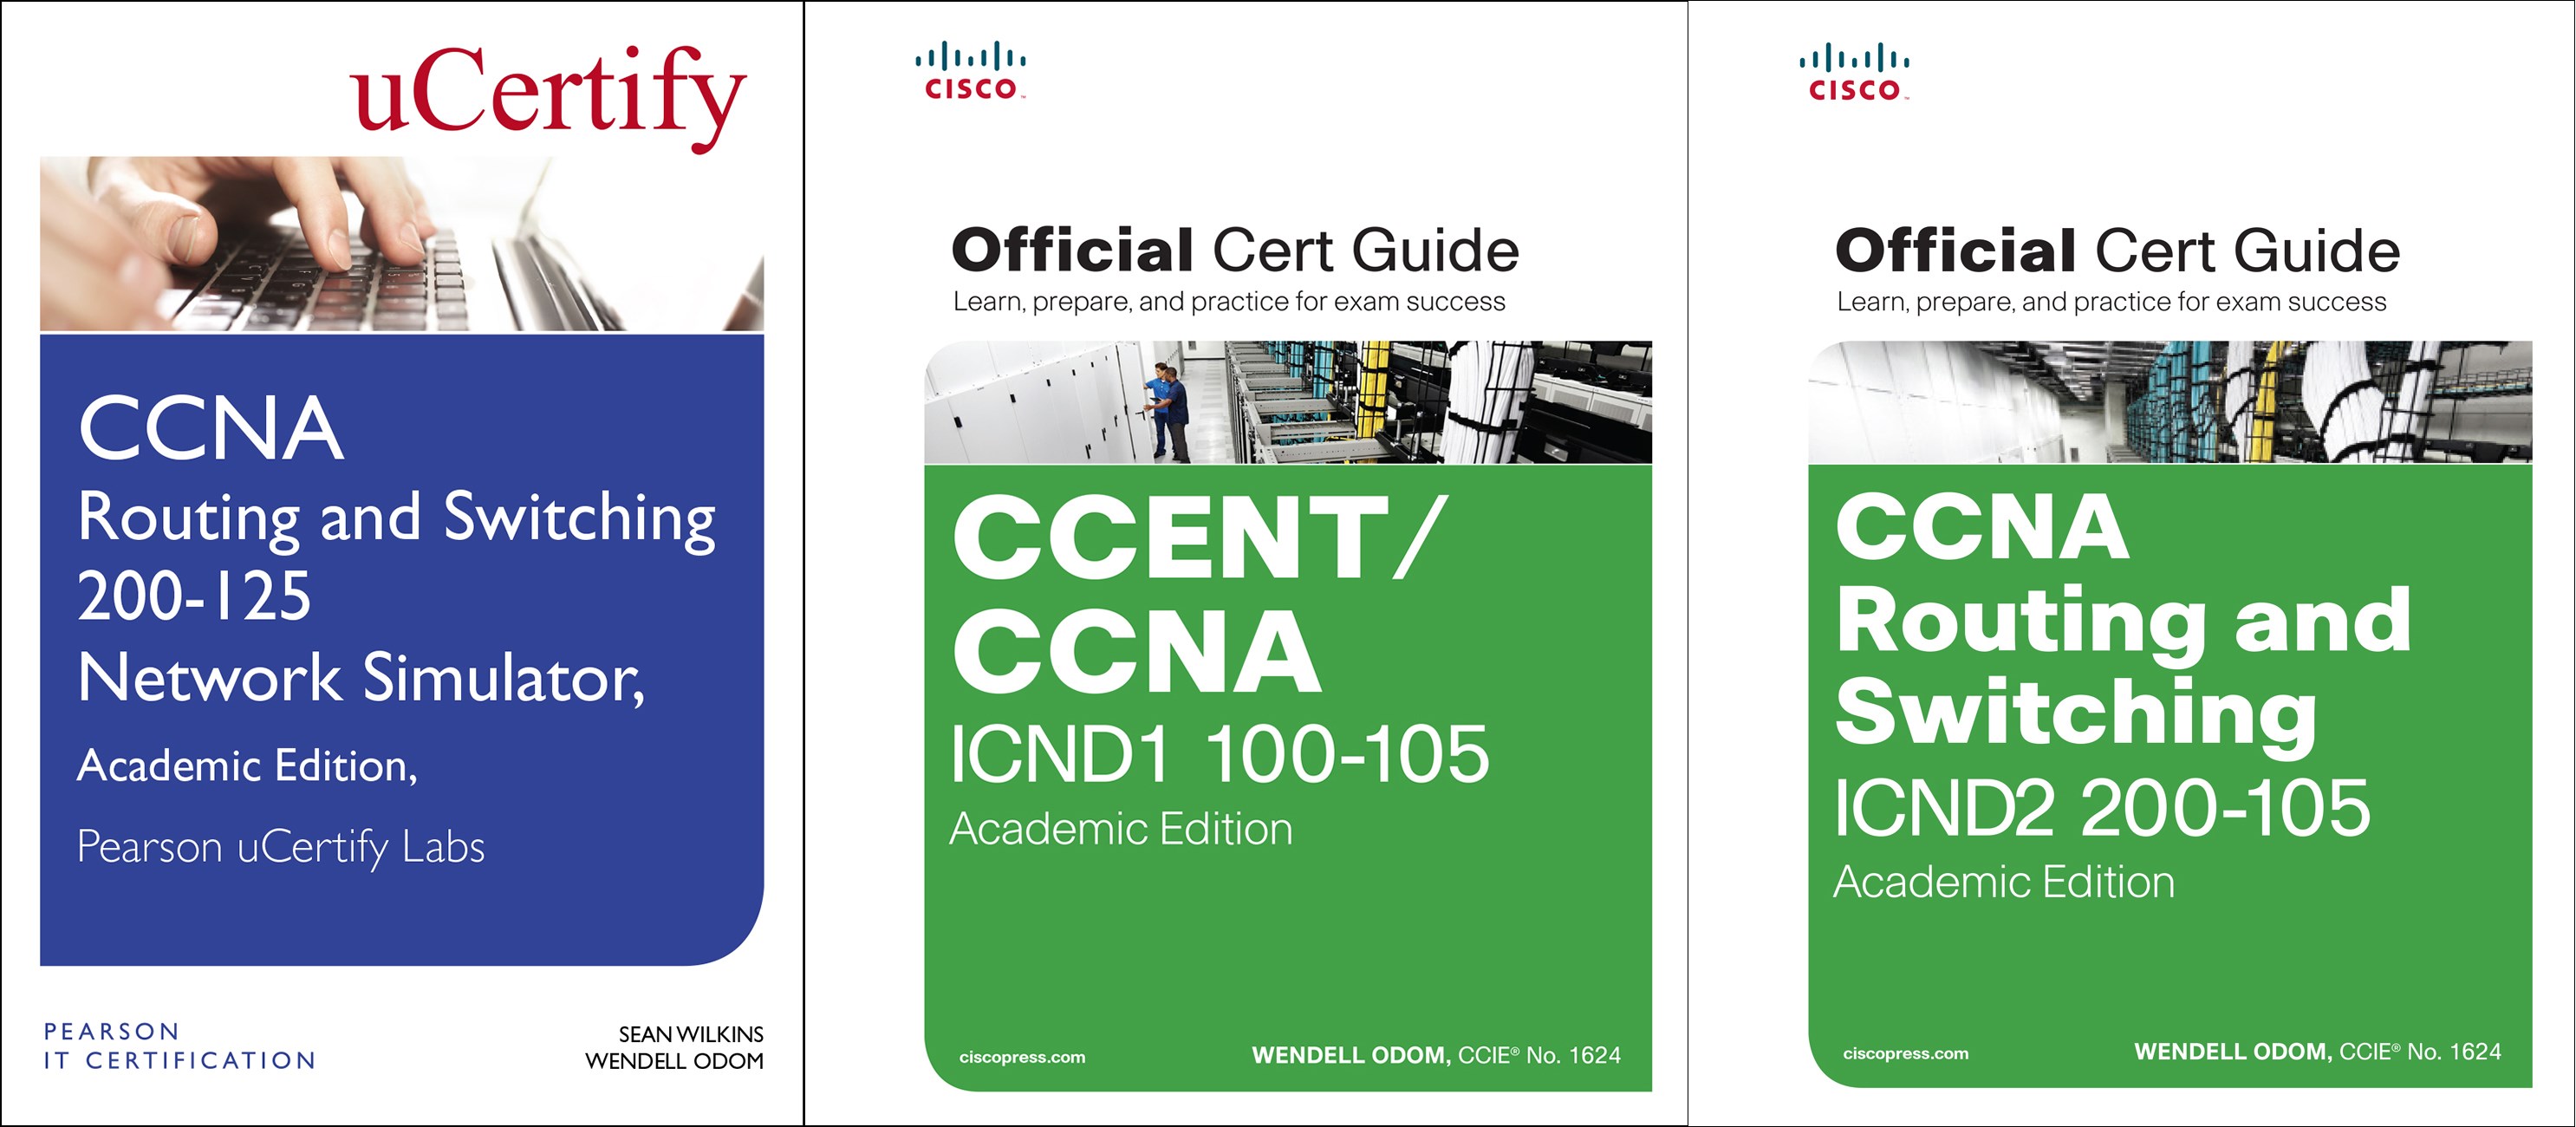 CCNA Routing and Switching 200-125 Official Cert Guide Library and Pearson uCertify Network Simulator Academic Edition Bundle